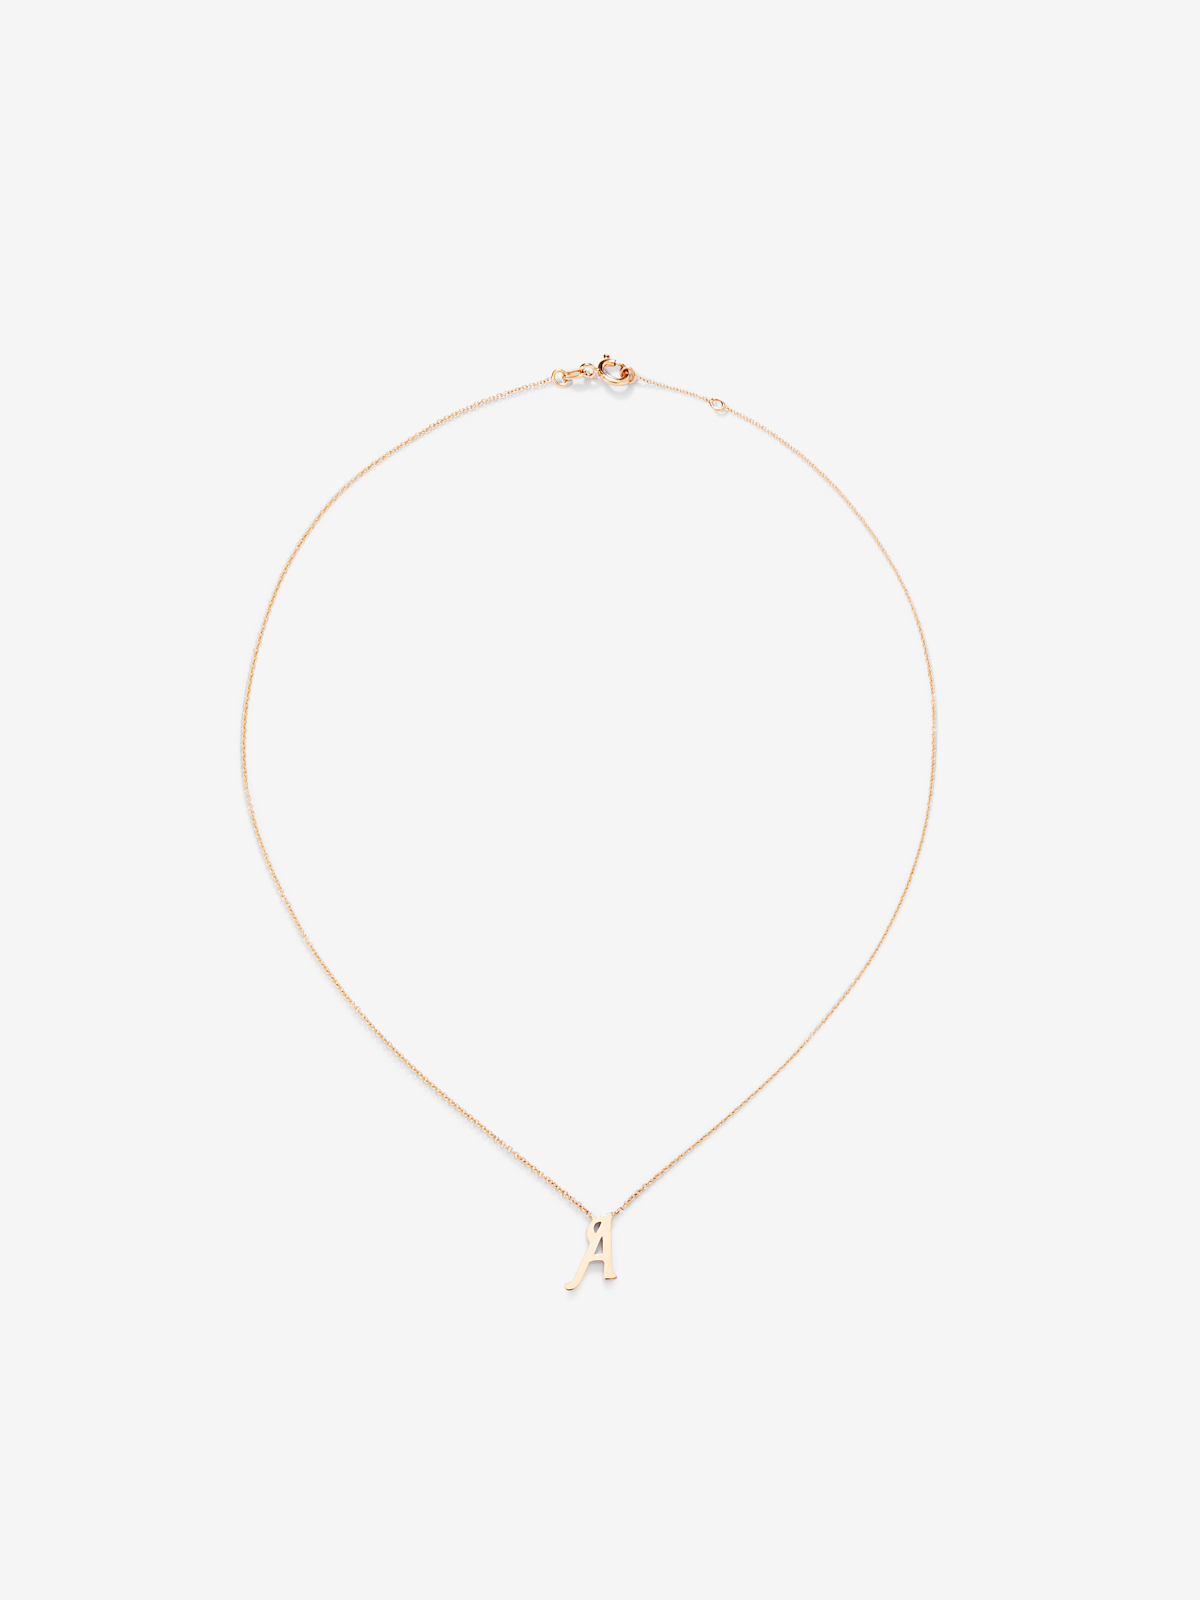 Pendant chain with initial A in 18K rose gold.